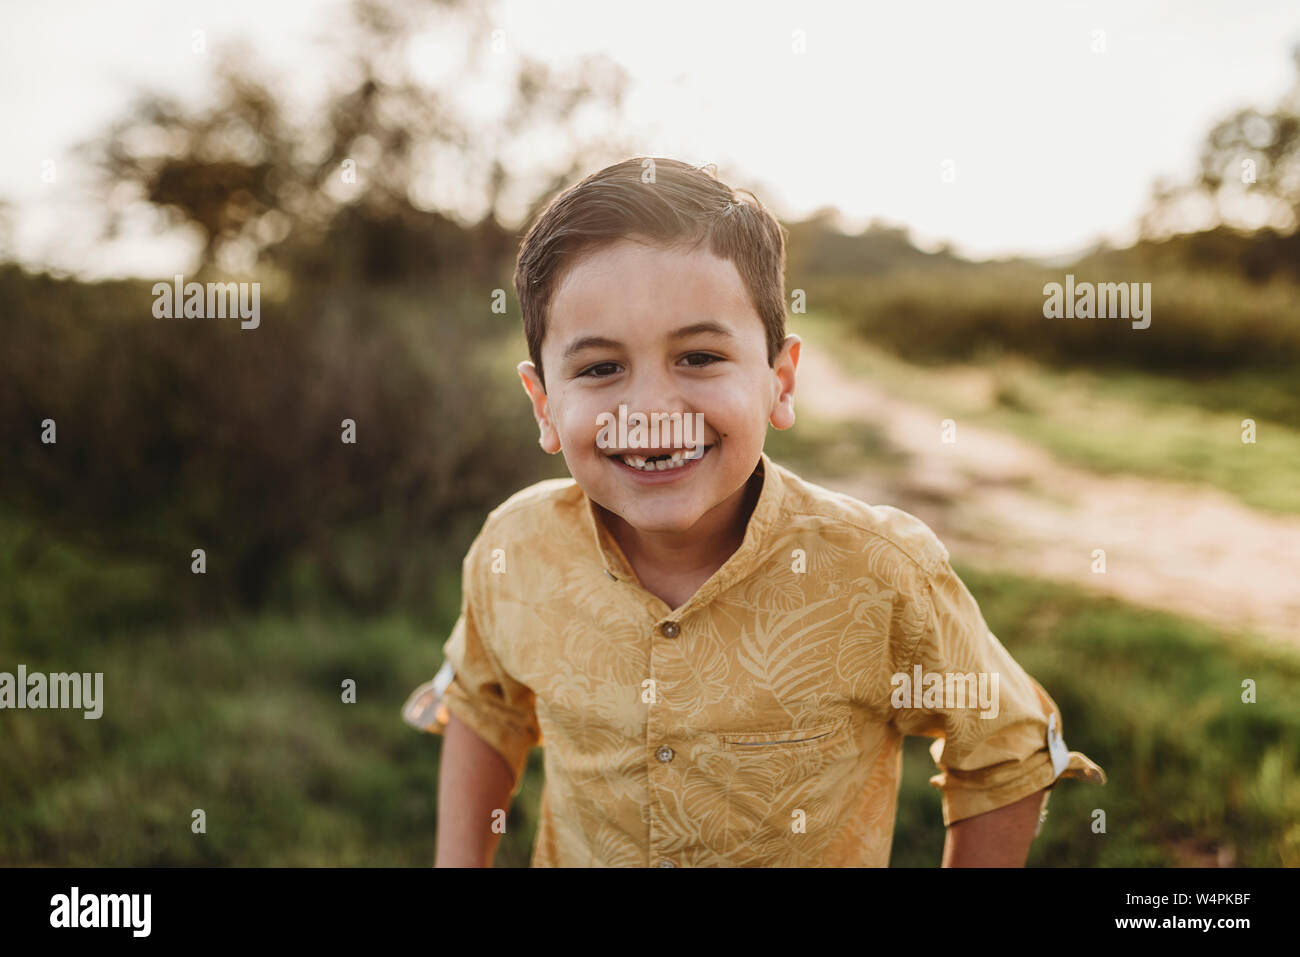 Portrait of young school-aged boy missing two front teeth Stock Photo